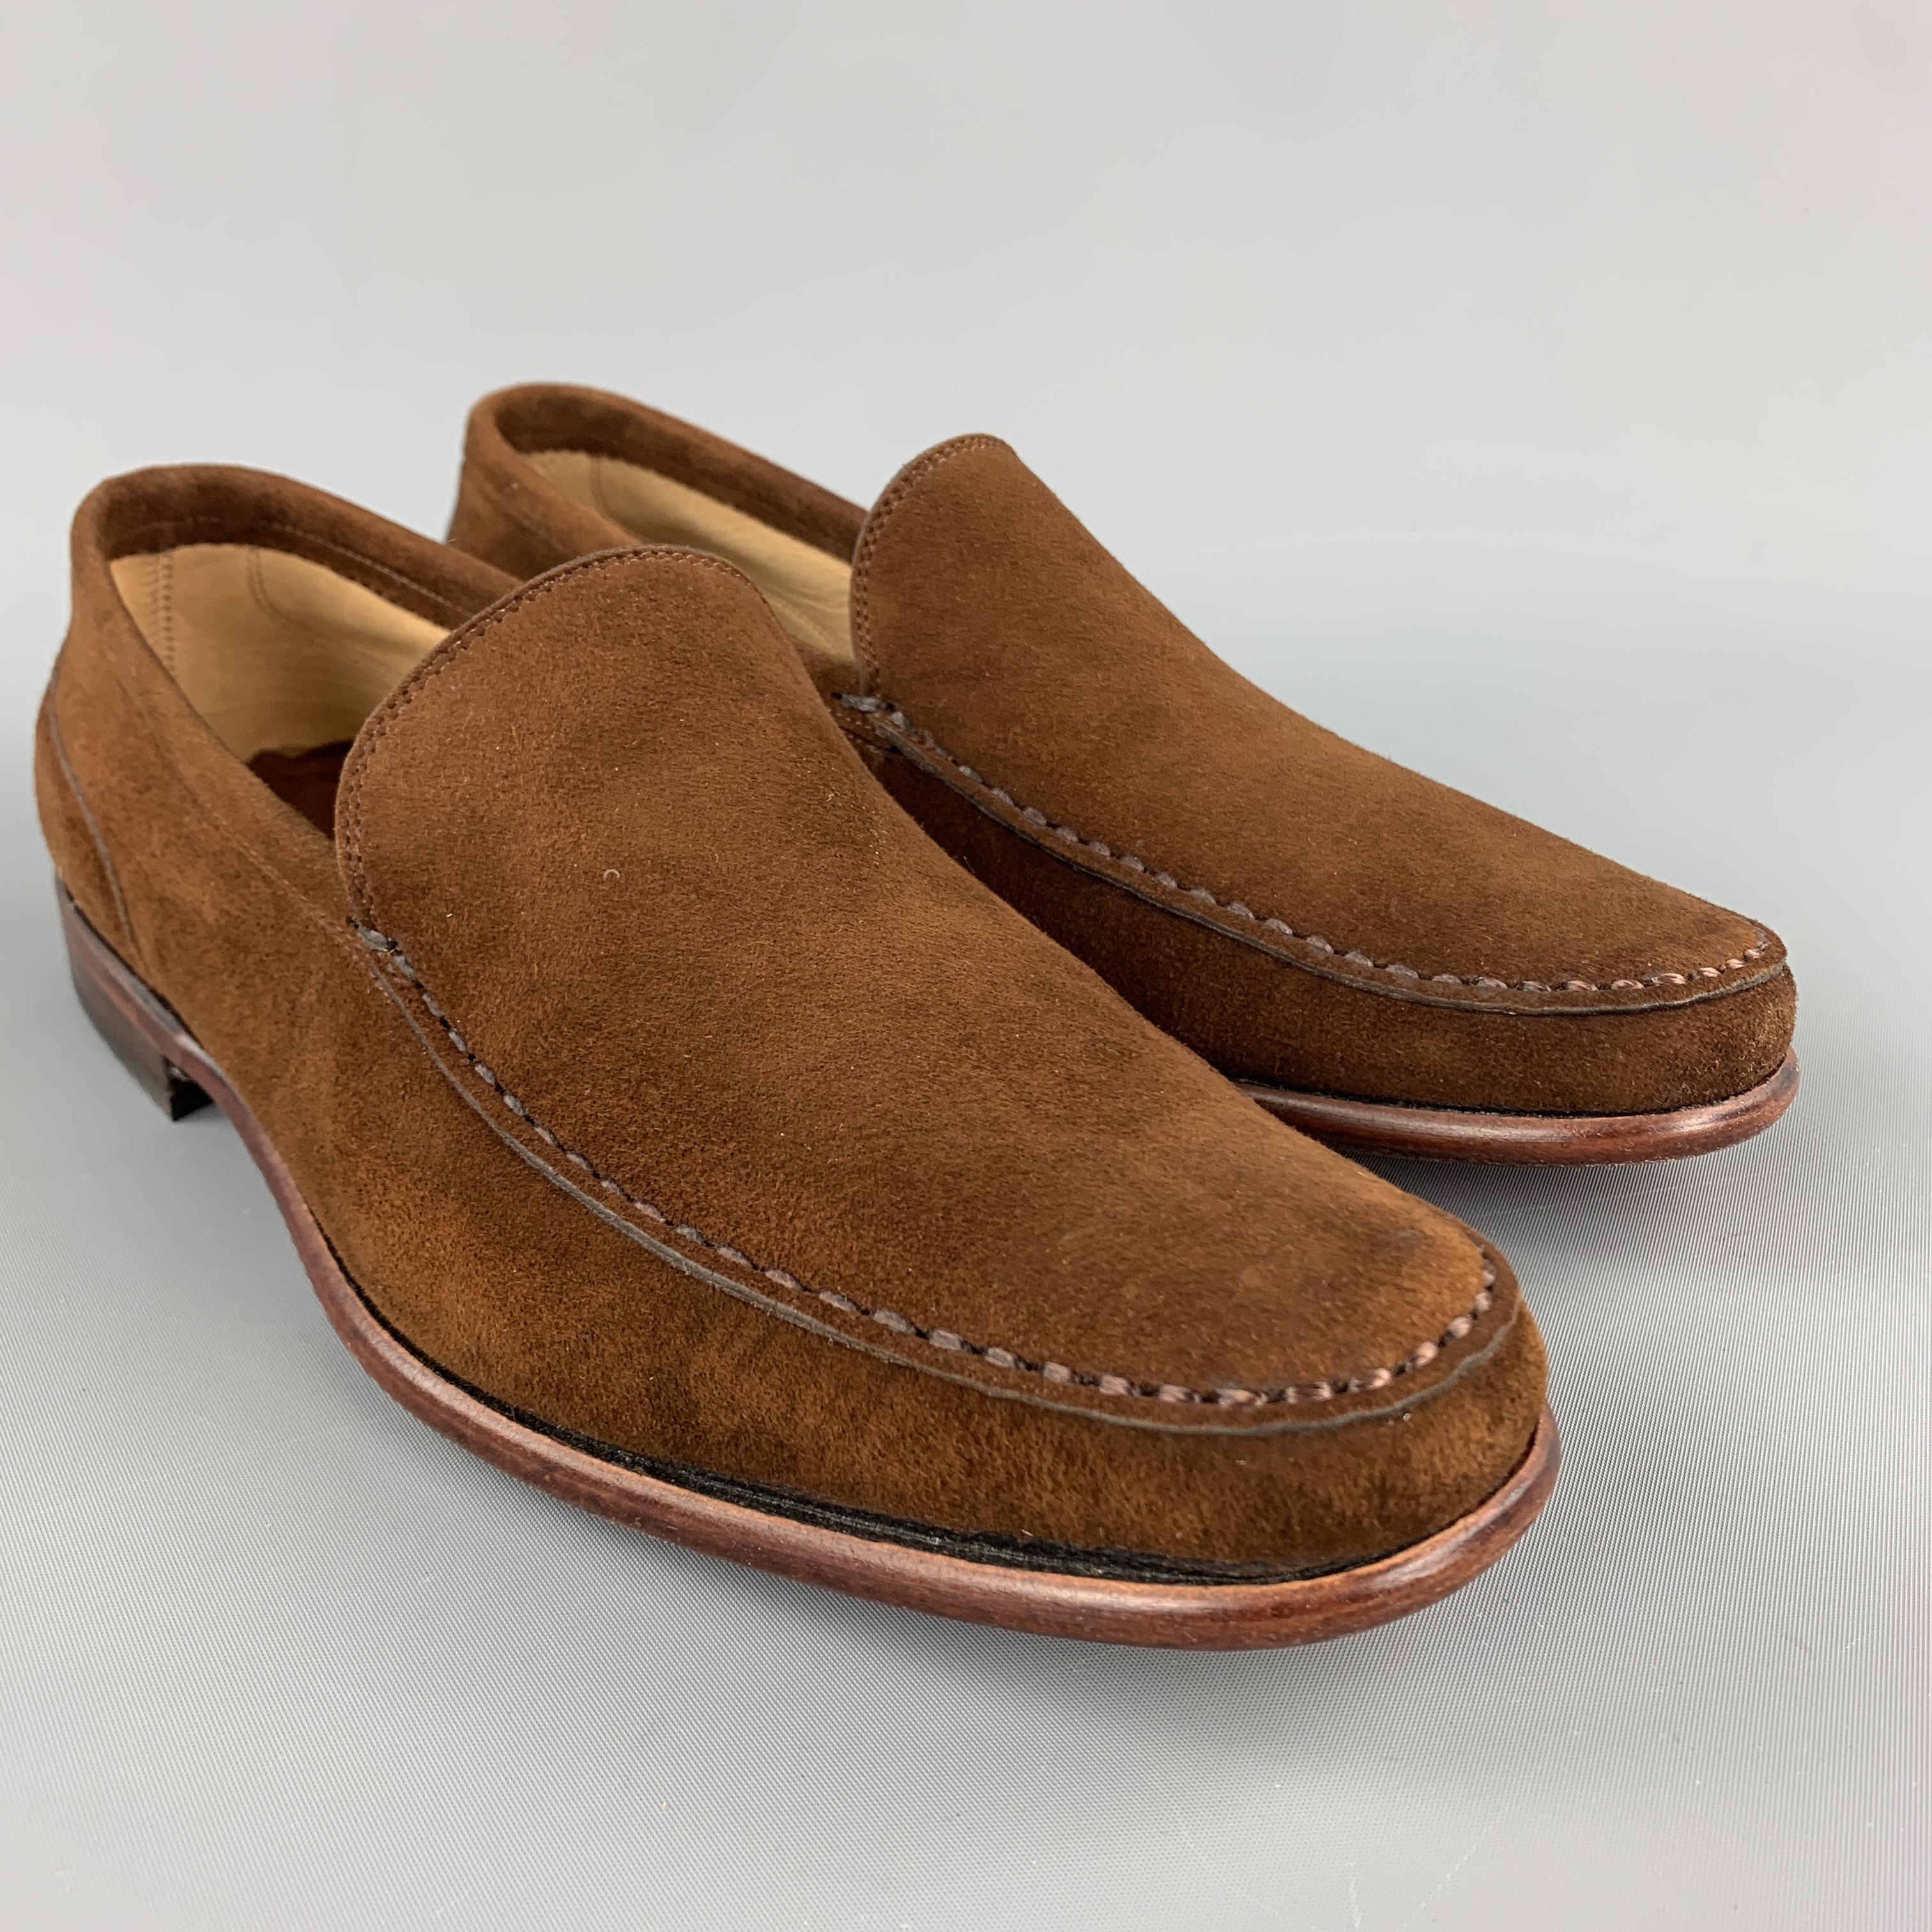 BOTTICELLI loafer comes in brown suede with an apron toe. Made in Argentina.

New with Box.
Marked: 10

Outsole: 11.75 x 4 in.